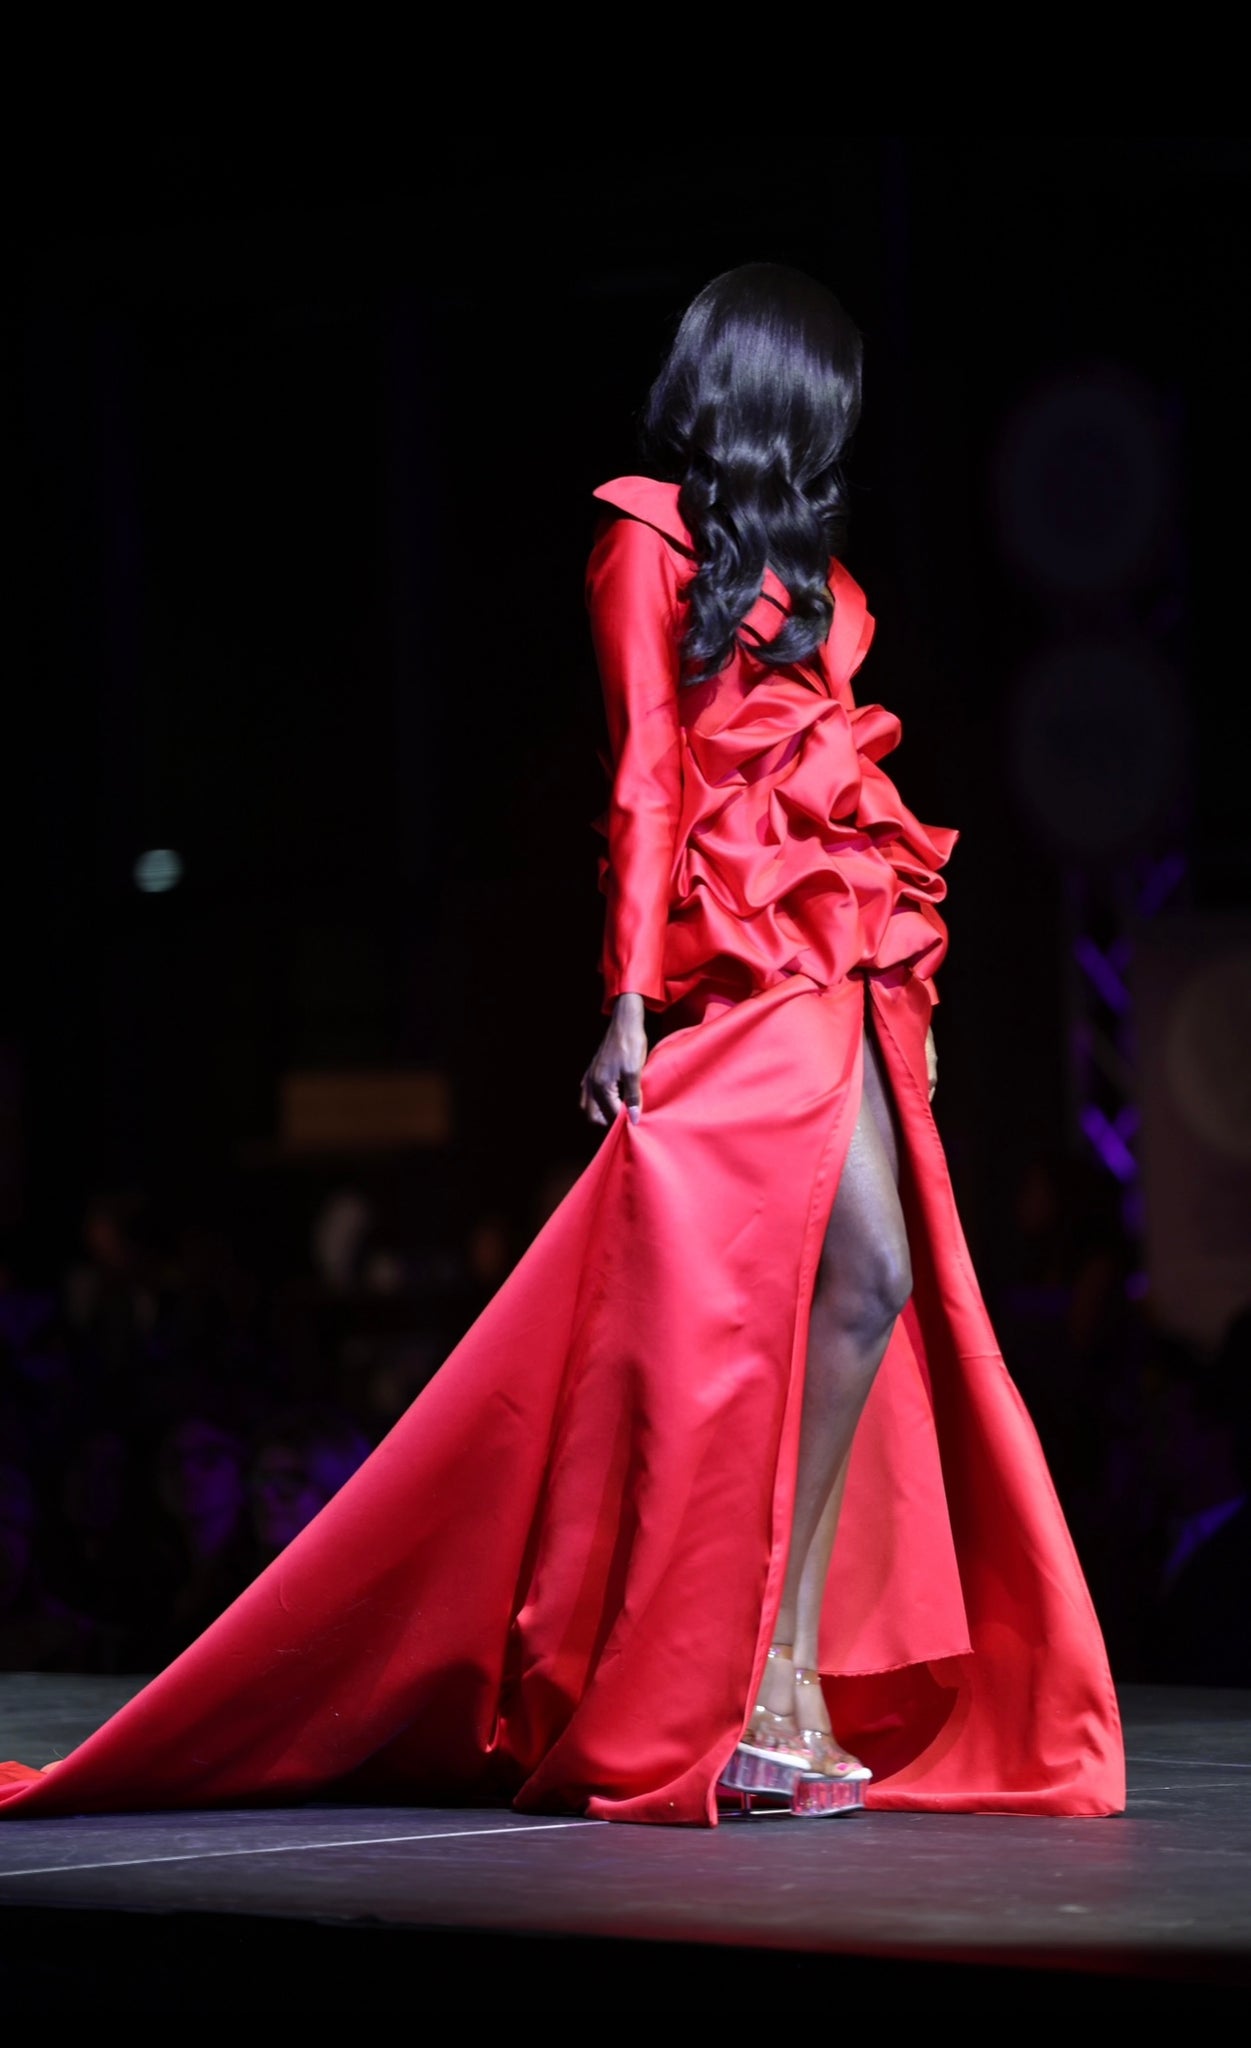 HOK House Of KLynn Couture Rich Satin Dramatic Red Luxury Ruffled Tuxedo Gown Open Back Flowing Train Evening Event Gala Vogue Runway Top Looks Lifestyle Holiday Party New Years Eve Birthday Red Carpet Style Inspiration Cover Model Designer Box Office Award Show Winner Nominees